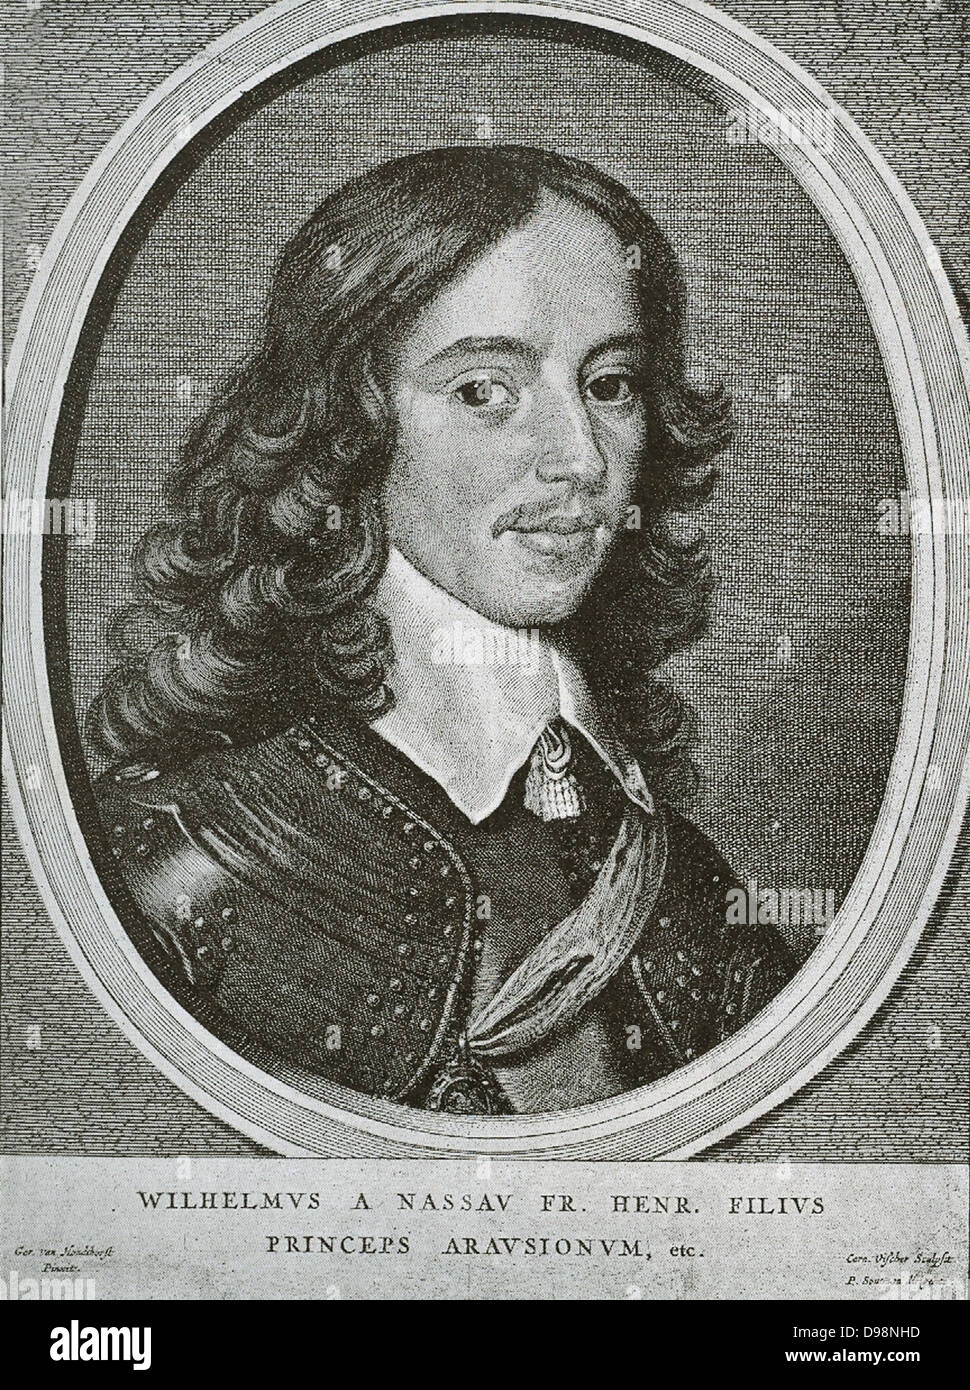 William II, Prince of Orange (1626-1650) was Sovereign Prince of Orange and Stadtholder of the United Provinces of the Netherlands from 14 March 1647 until his death three years later.  William was the son of Stadtholder Frederik Hendrik of Orange and Amalia of Solms-Braunfels. On May 2nd 1641, he married Mary Henrietta Stuart, the Princess Royal, eldest daughter of King Charles I of England and Queen Henrietta Maria in the Chapel Royal Whitehall Palace, London.  In 1648 he opposed acceptance of the Treaty of Minster, despite the fact that it recognised the independence of the Netherlands. Stock Photo